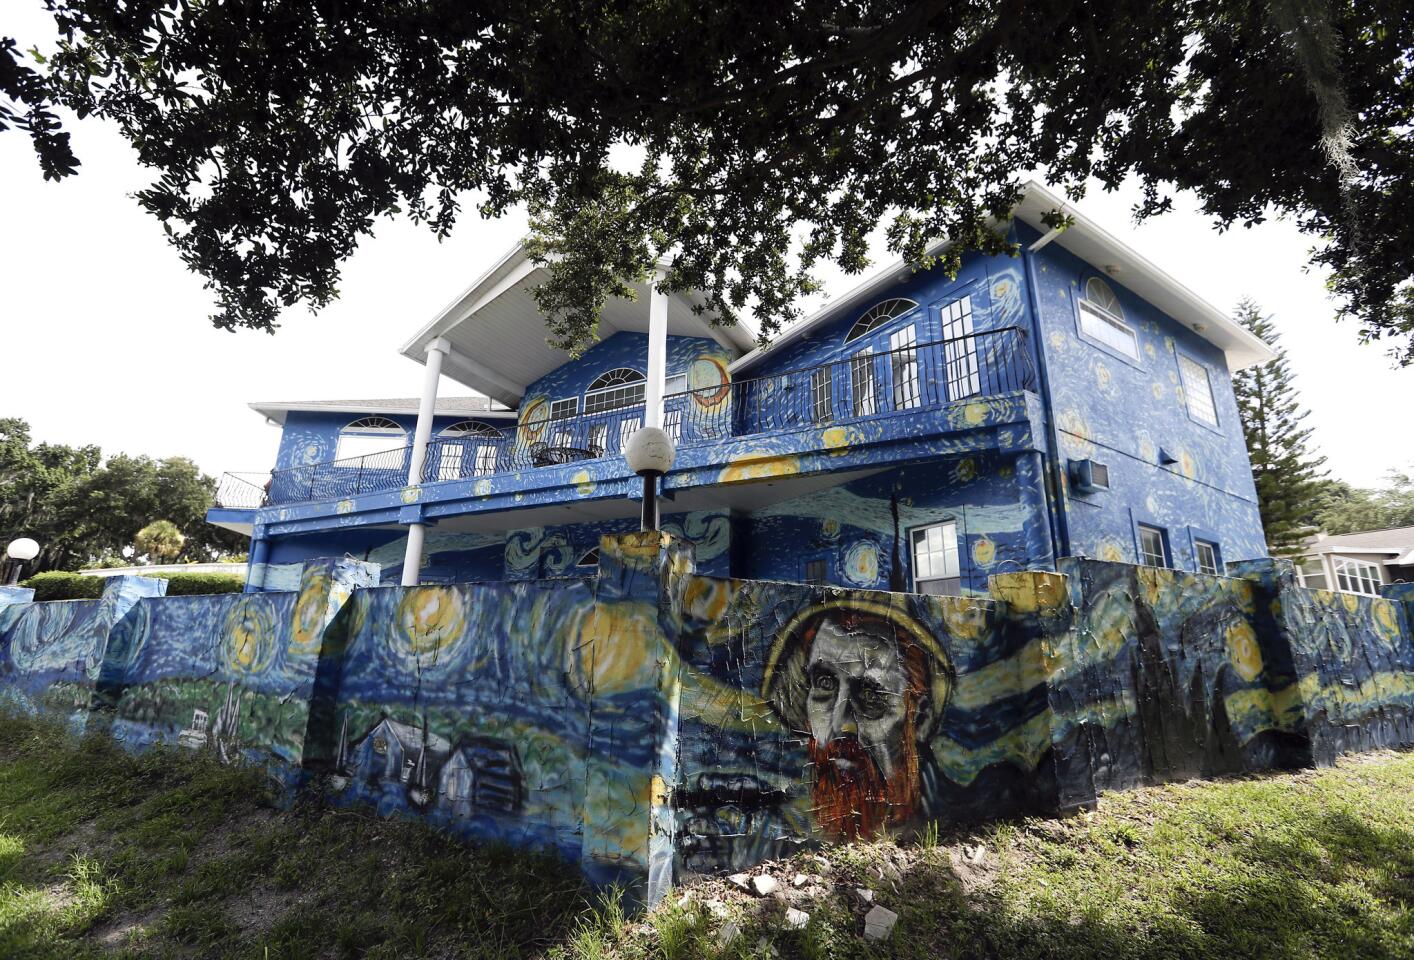 This Wednesday, July 18, 2018 photo shows the painted exterior of the home of Lubomir Jastrzebski and Nancy Memhauseer in Mount Dora, Fla.